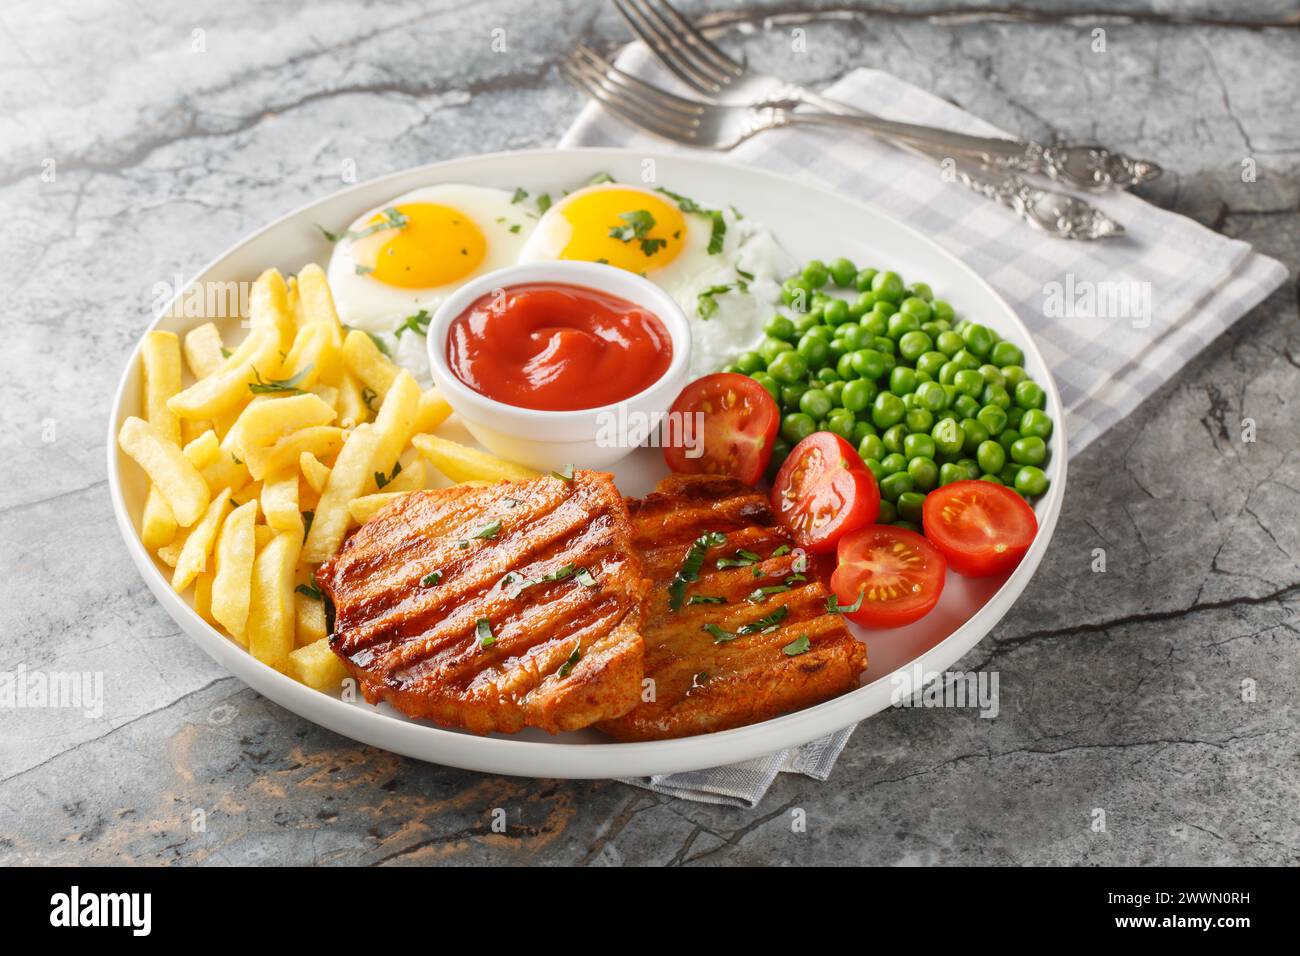 Portion of grilled loin steak with green peas, fried eggs, french fries, fresh tomatoes and sauce close-up in a plate on the table. Horizontal Stock Photo